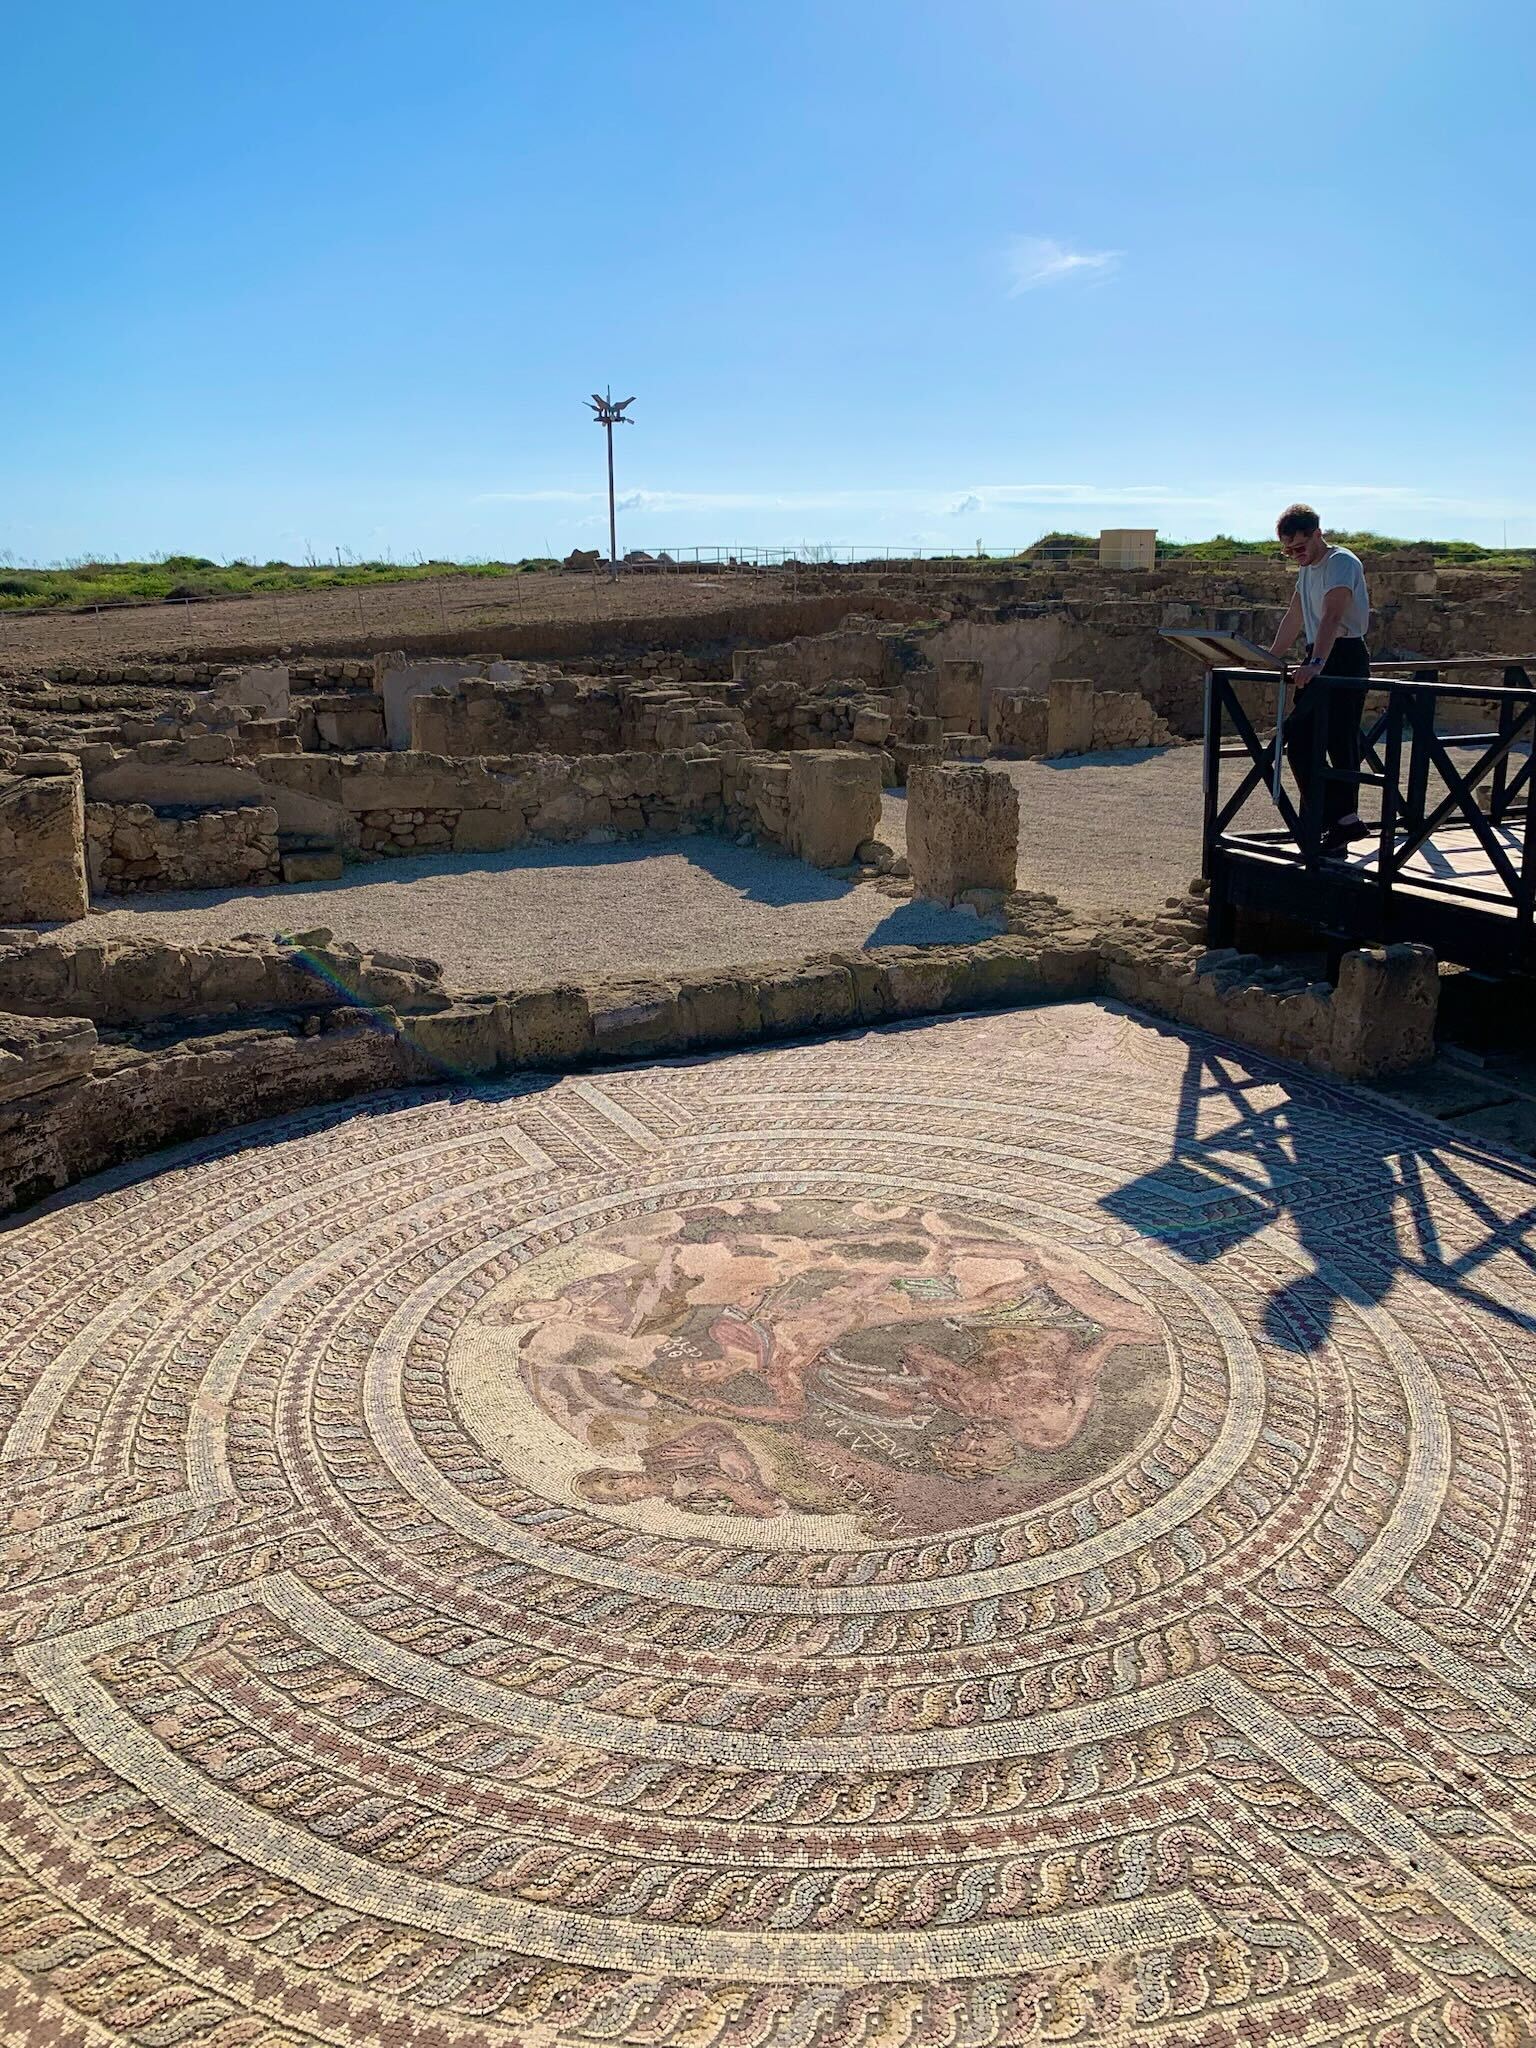 Head to Paphos Archaeological Park to explore well-preserved ruins of ancient Roman villas